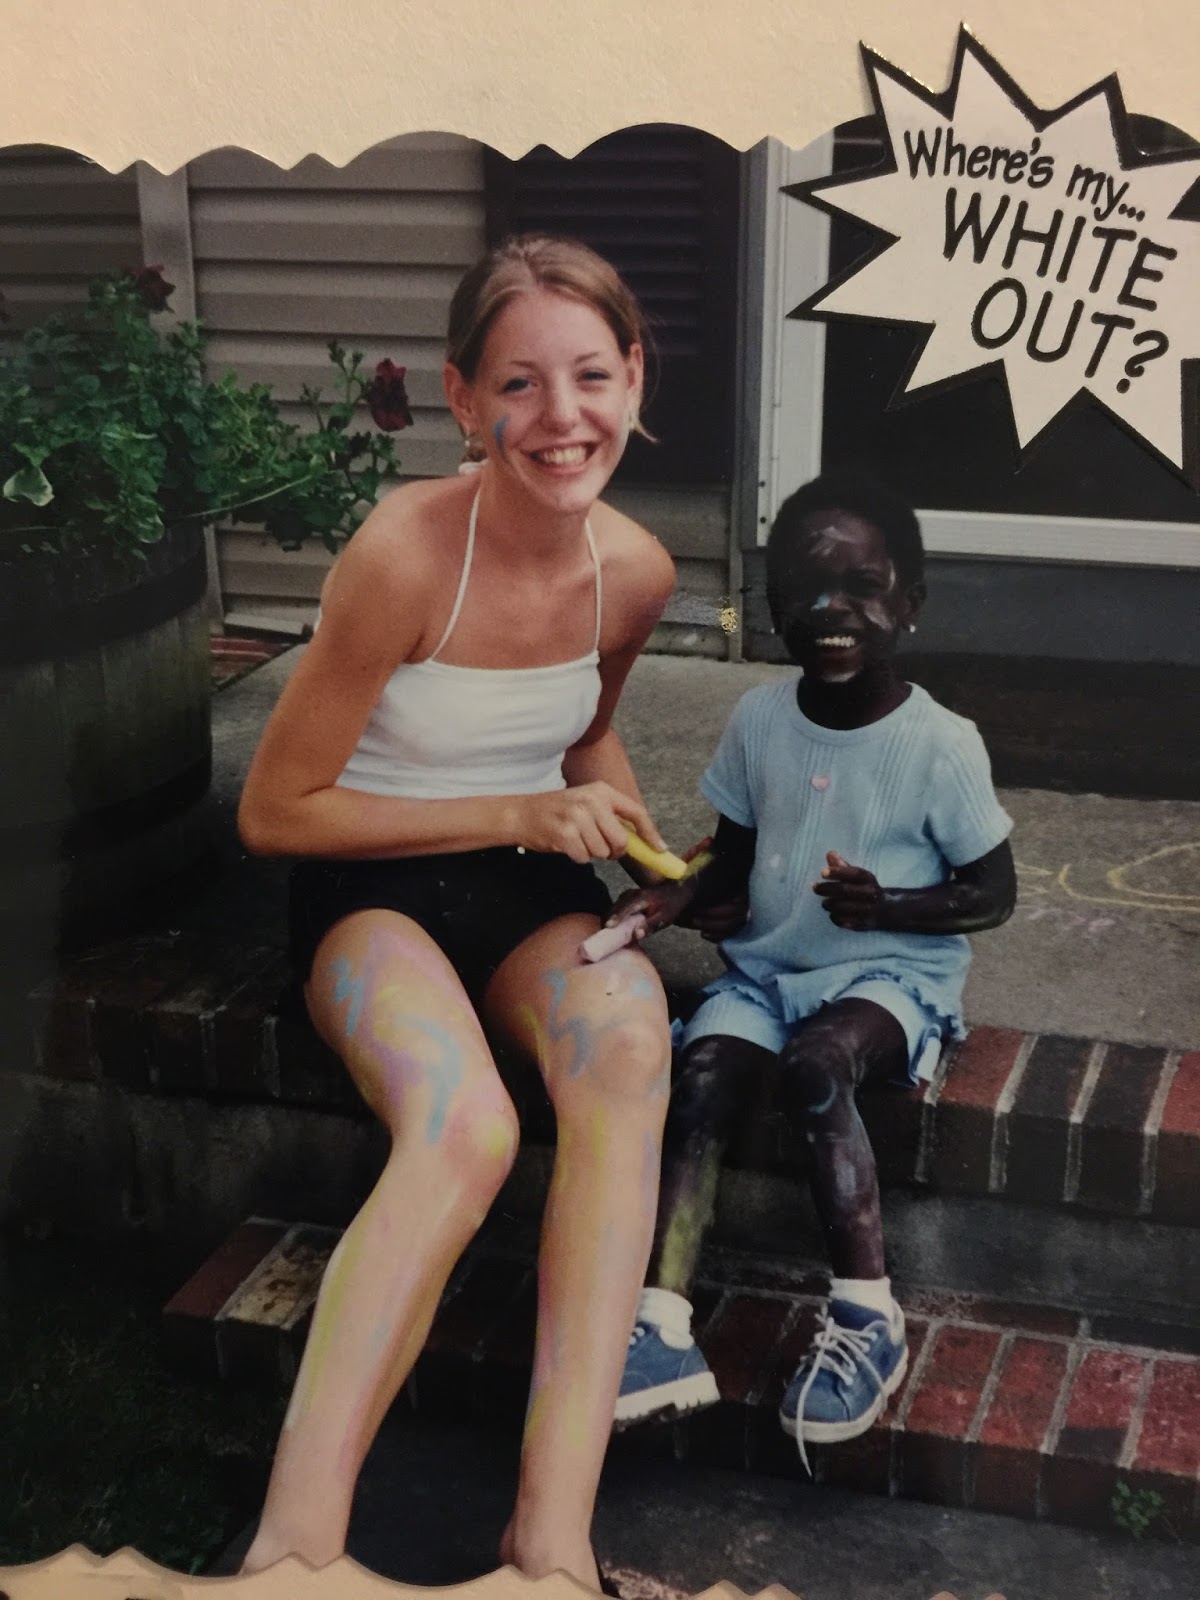 Effects of interracial adoption